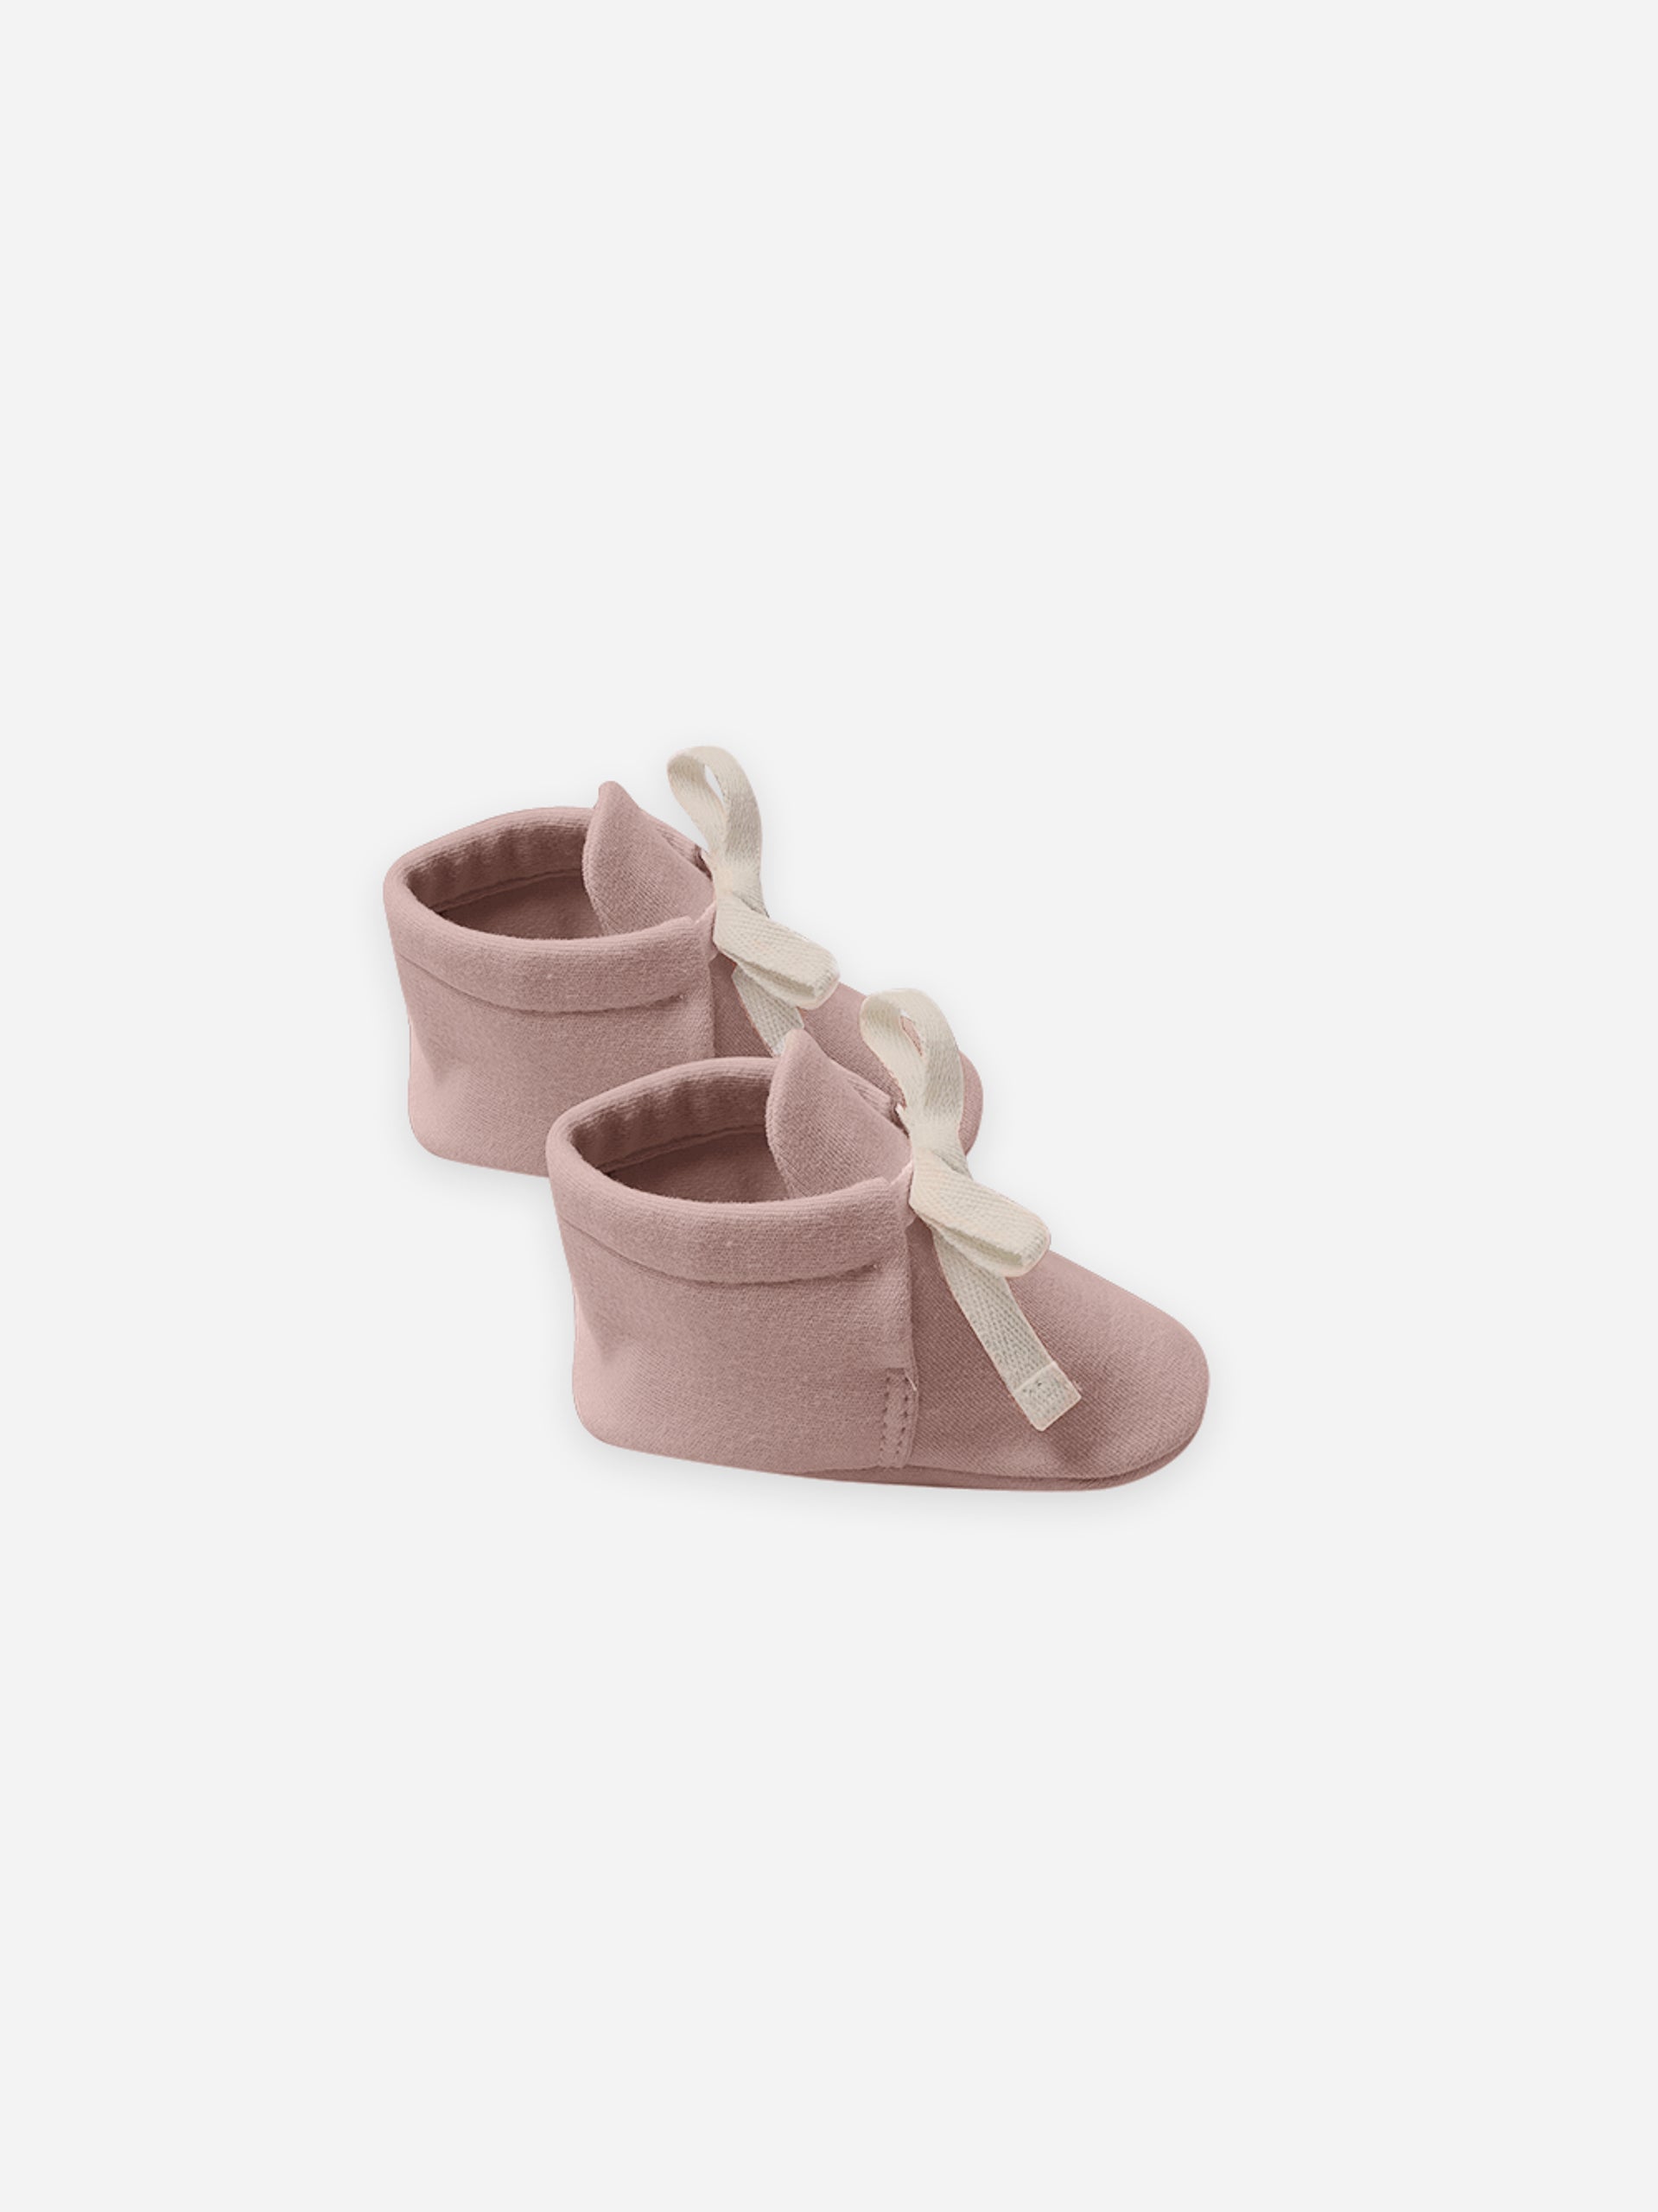 baby booties | lilac - Quincy Mae | Baby Basics | Baby Clothing | Organic Baby Clothes | Modern Baby Boy Clothes |